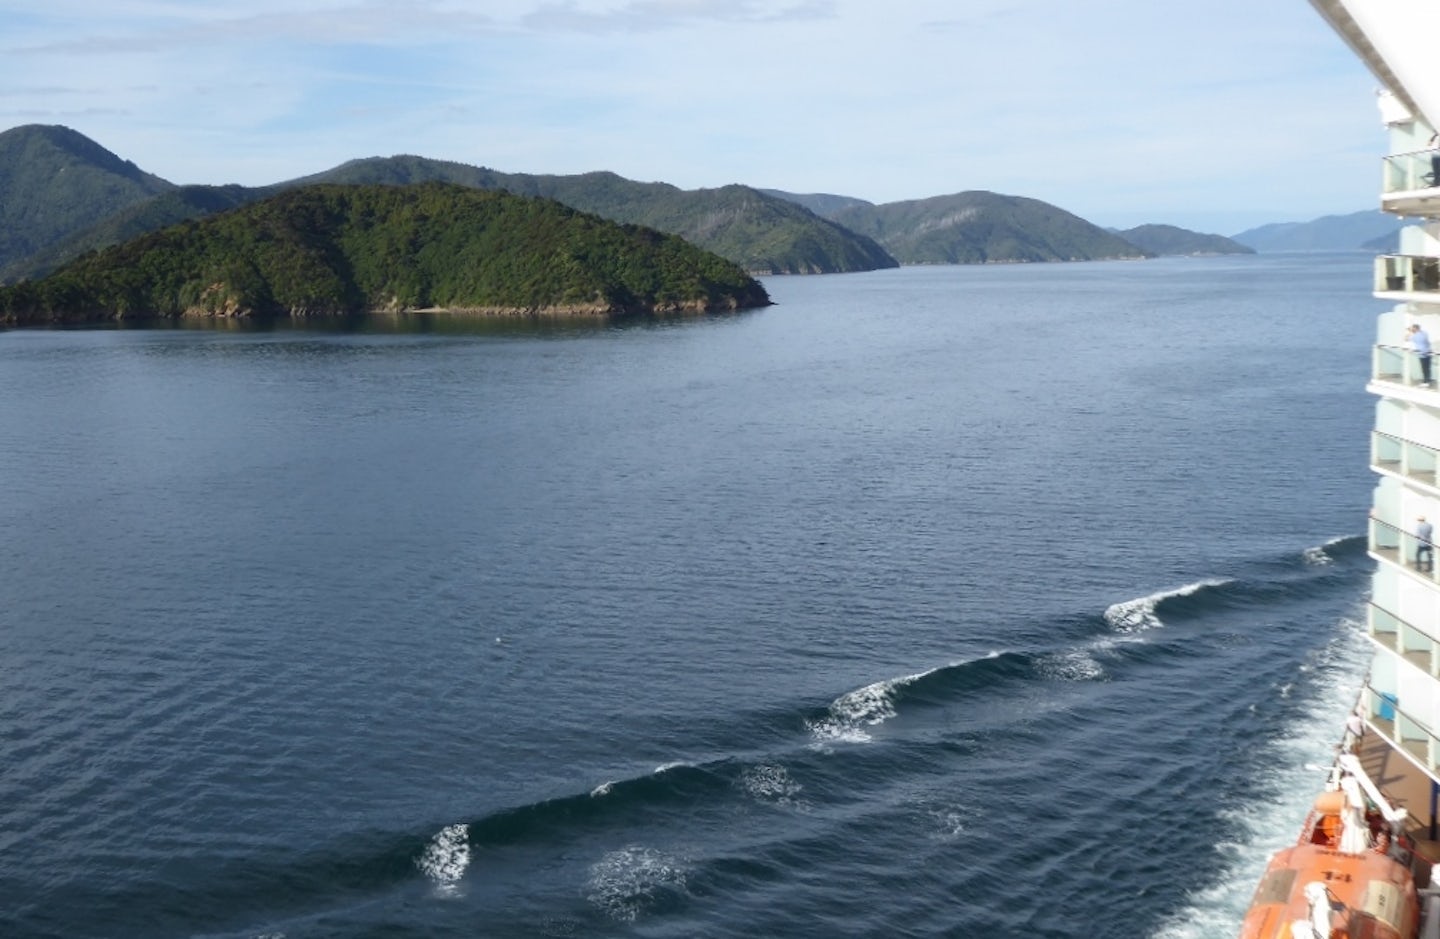 View from ship approaching Picton